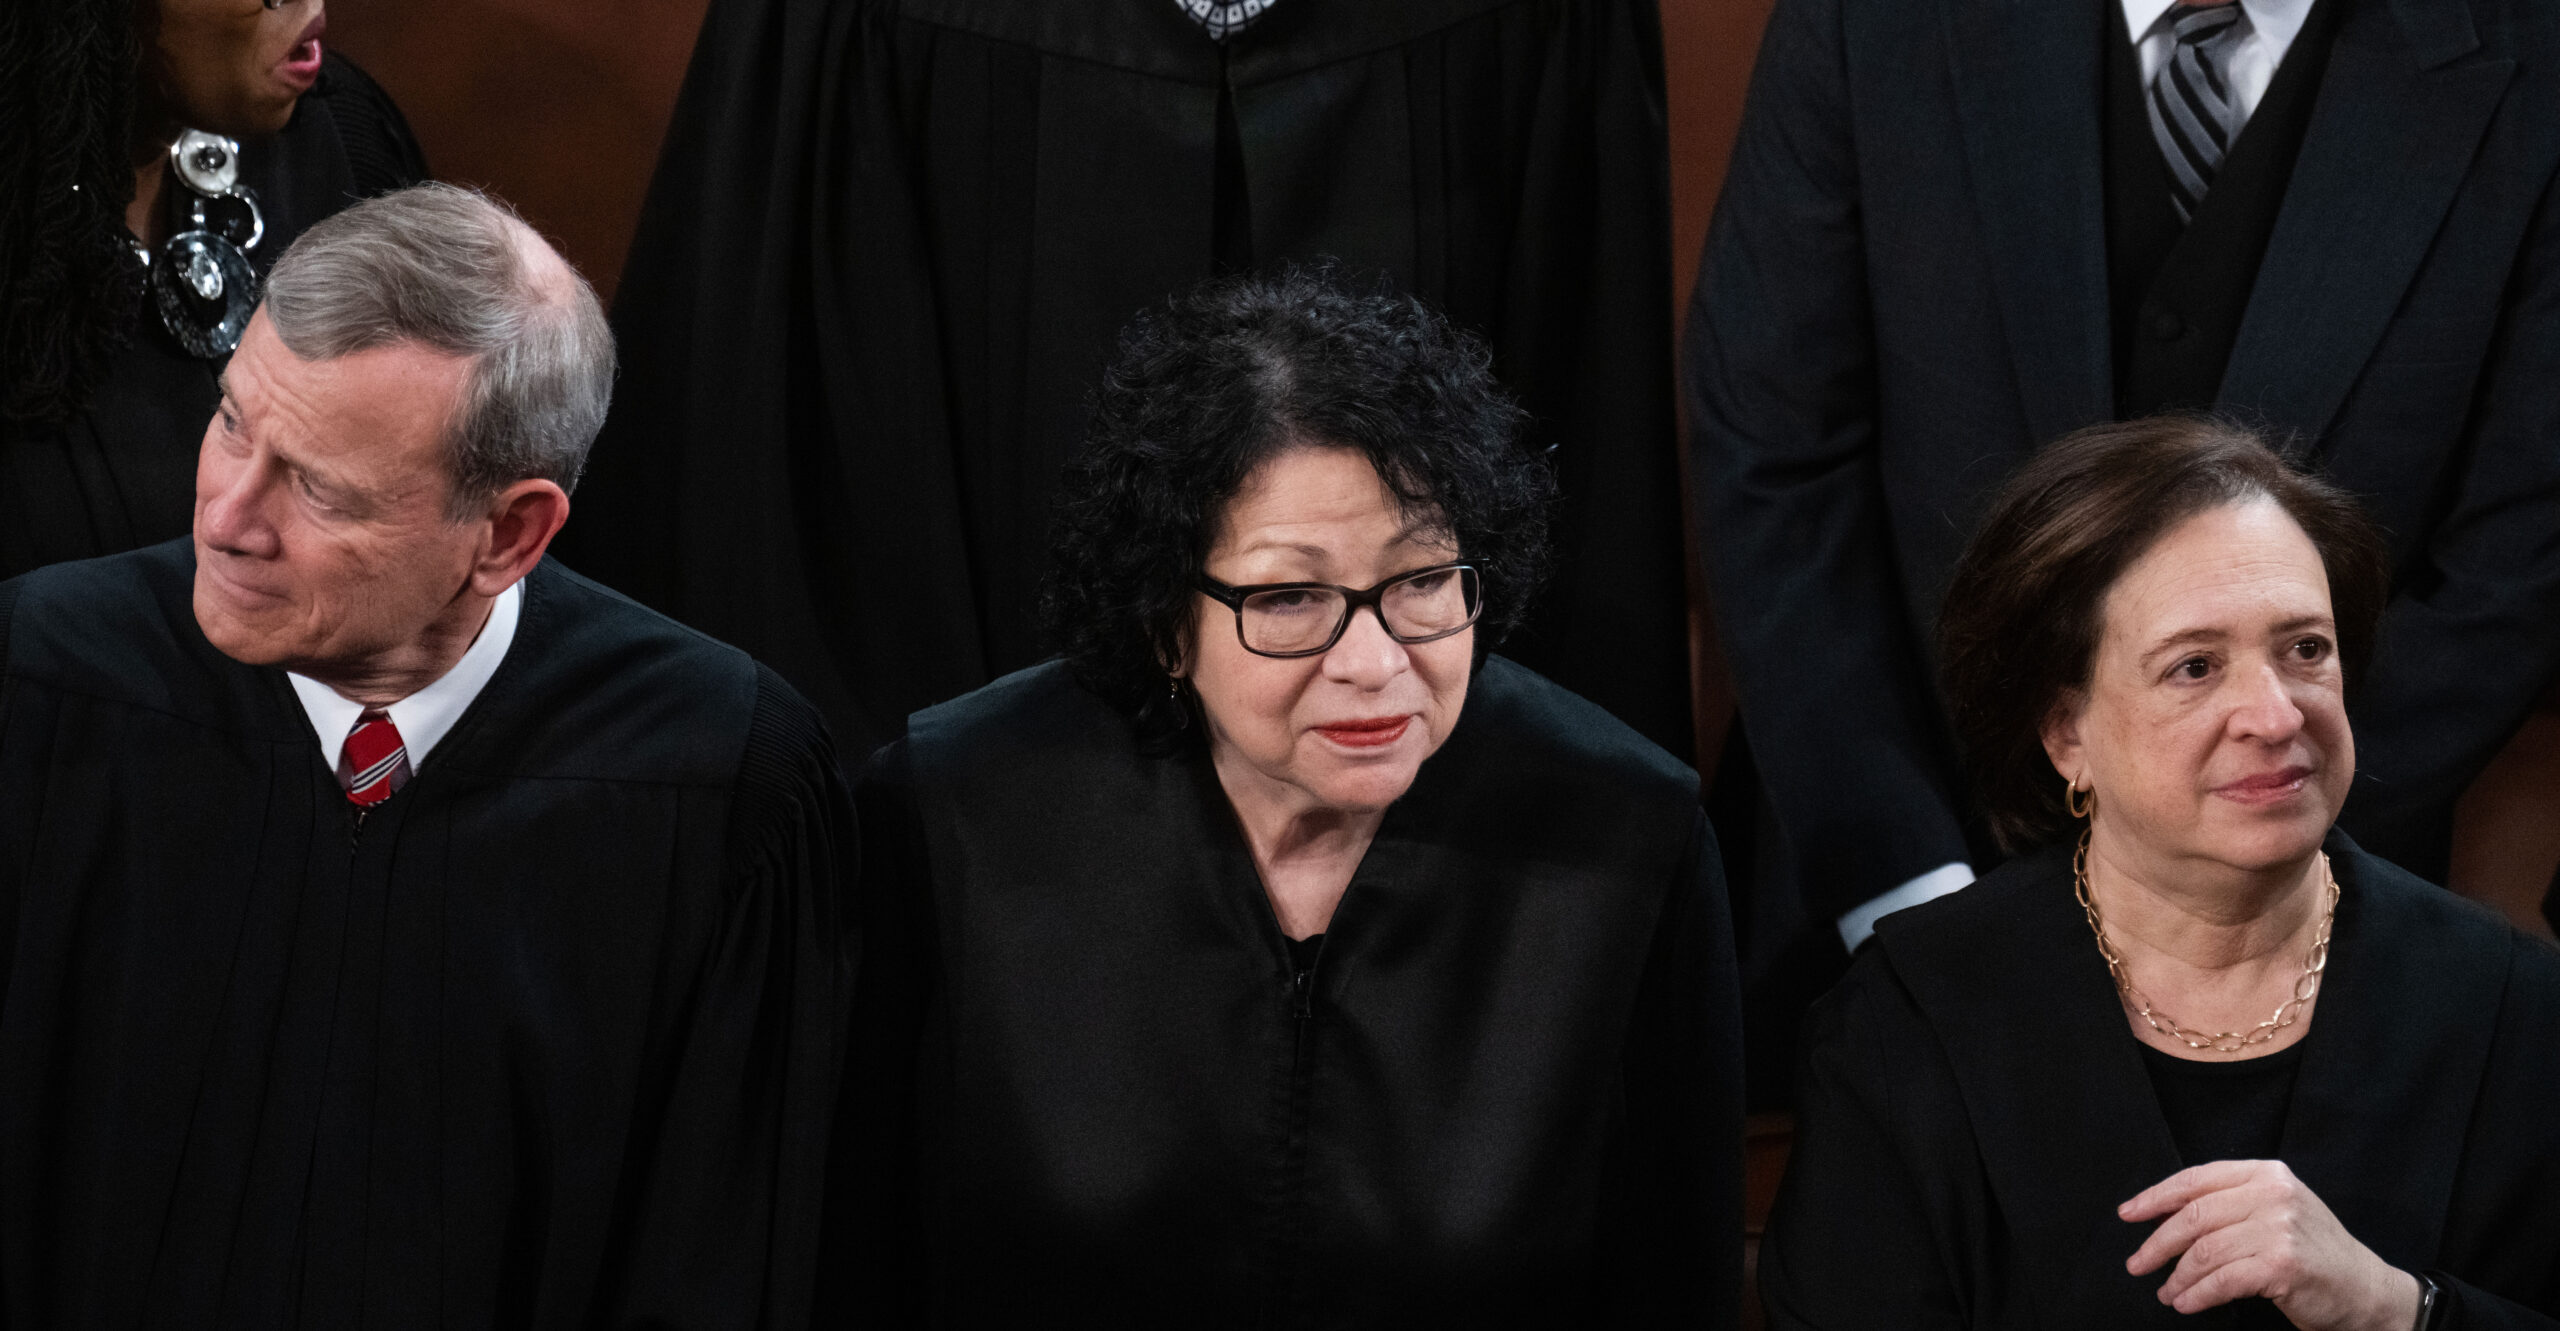 ‘Unpacking’ the Court: Why the Left Wants Sotomayor Gone